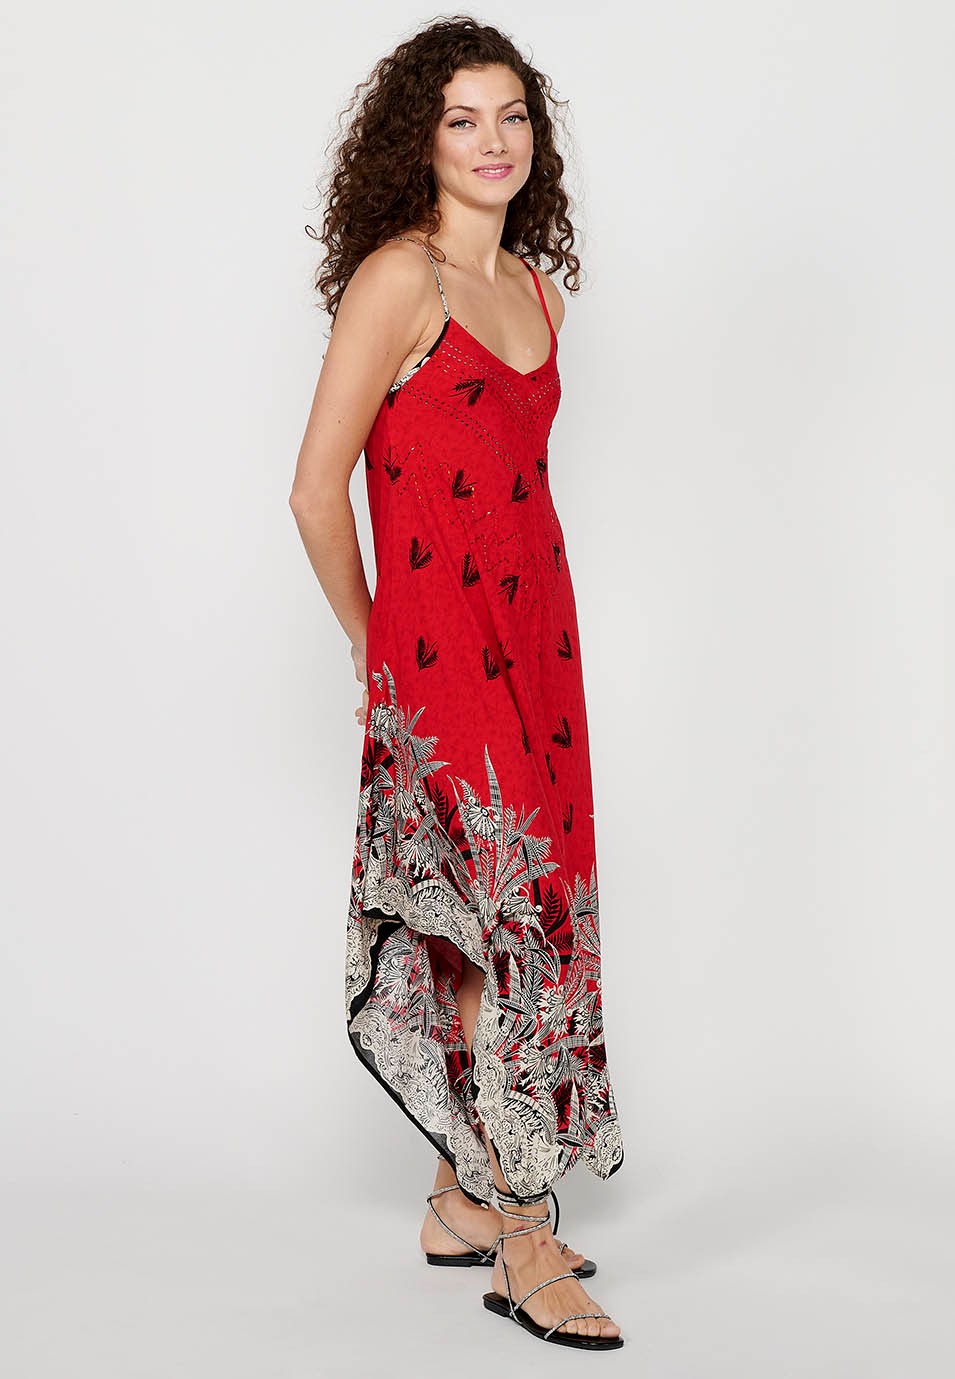 Strap Dress with V-neckline and Red Floral Print for Women 7